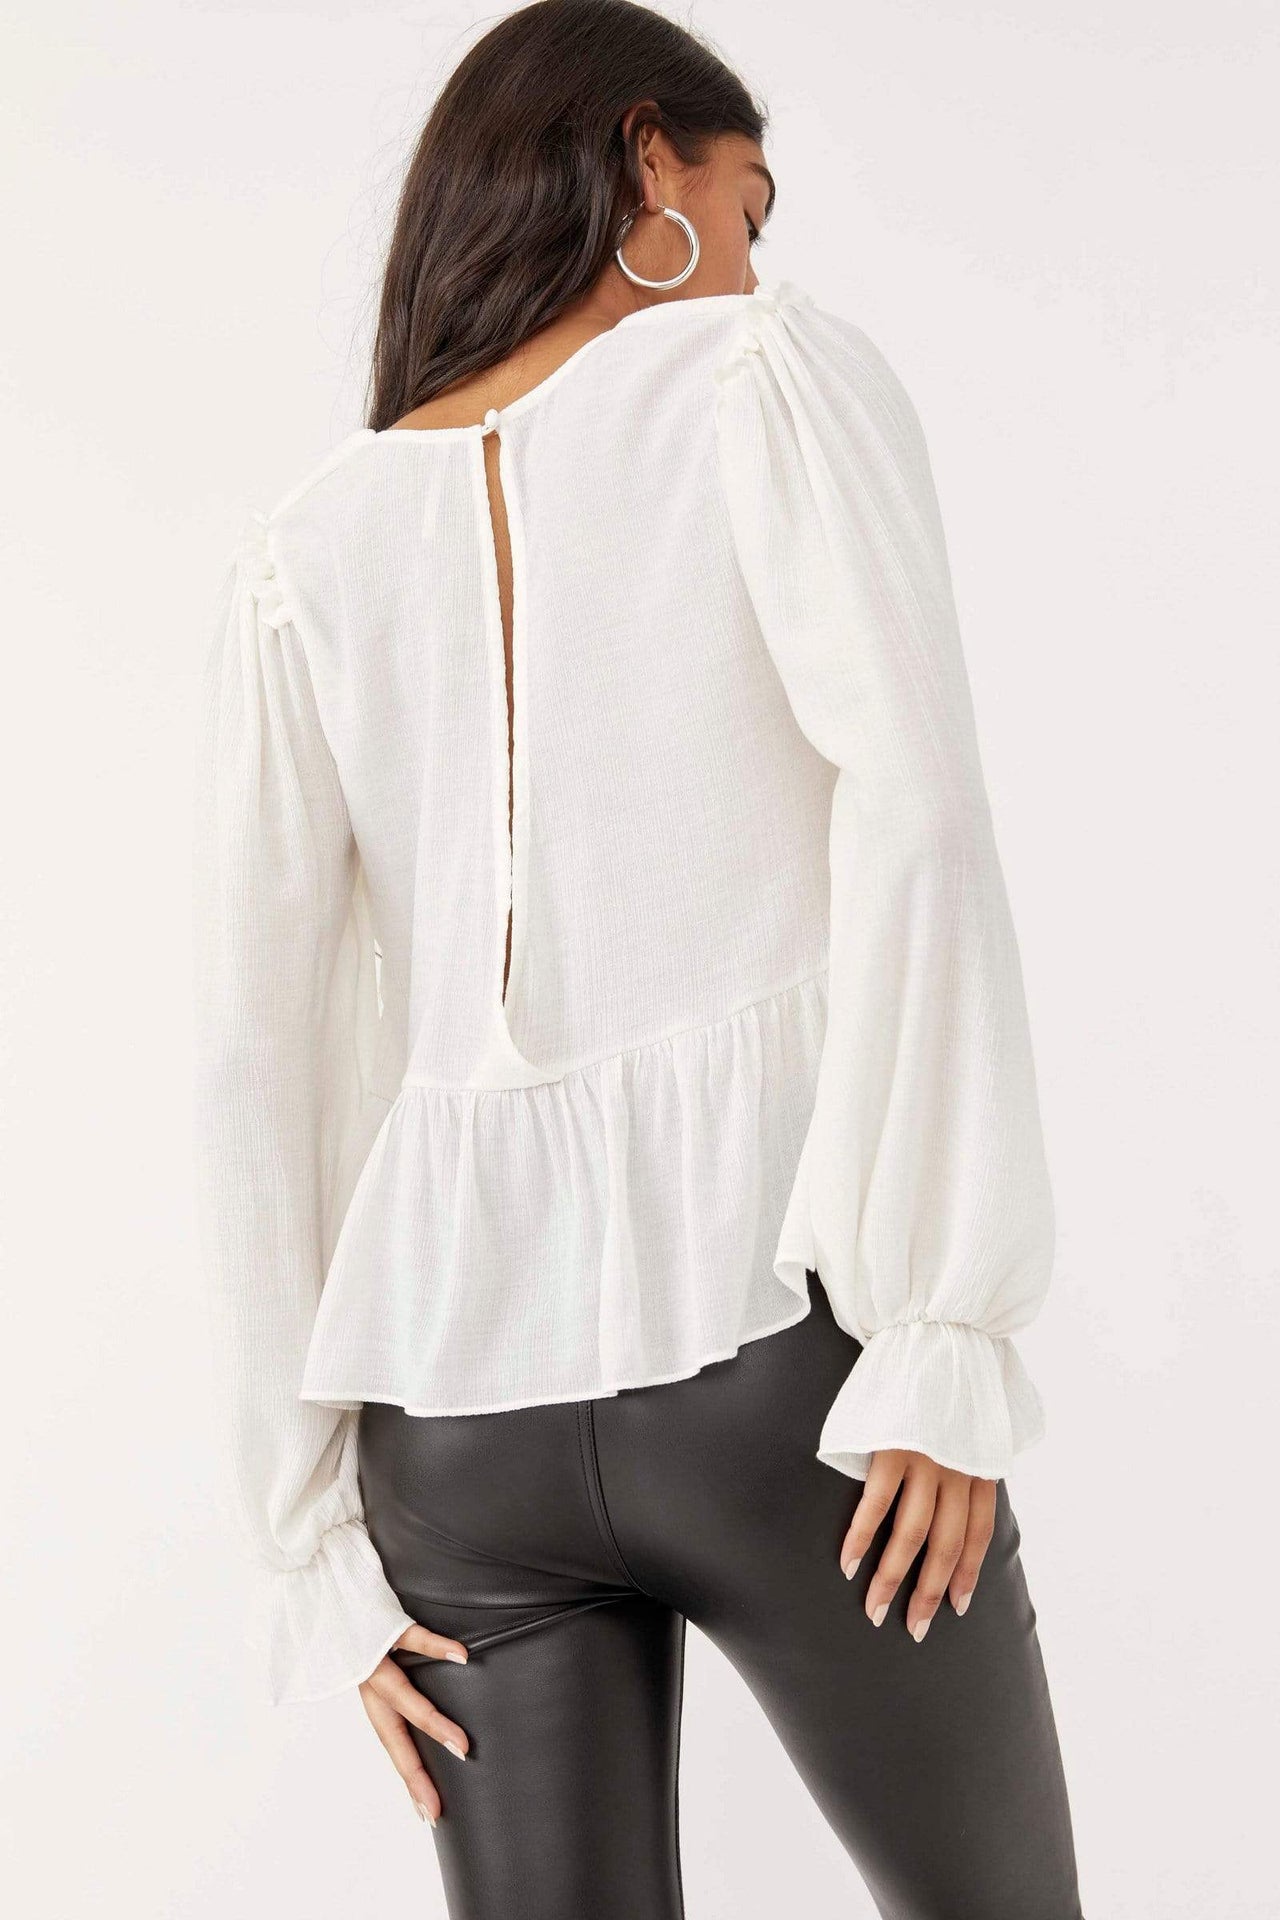 Daia Top Frenchnilla, Long Blouse by Free People | LIT Boutique